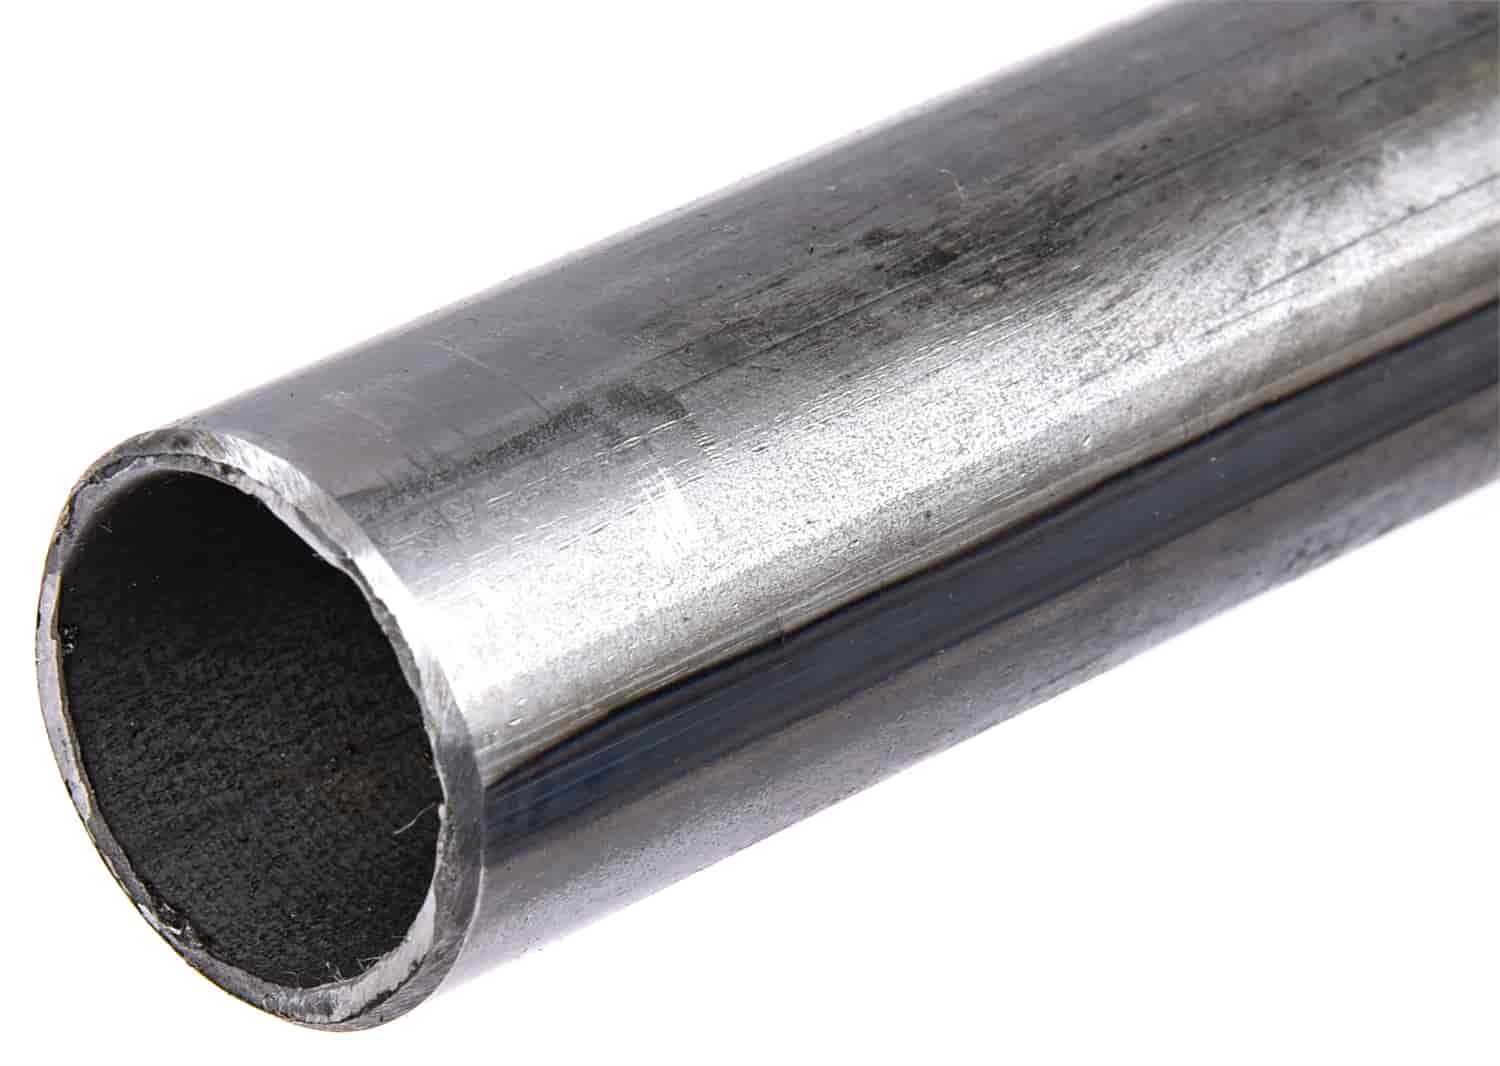 Mild Steel Tubing [Round, 1 in. Diameter x 0.083 in. Thickness x 4 ft. Length]